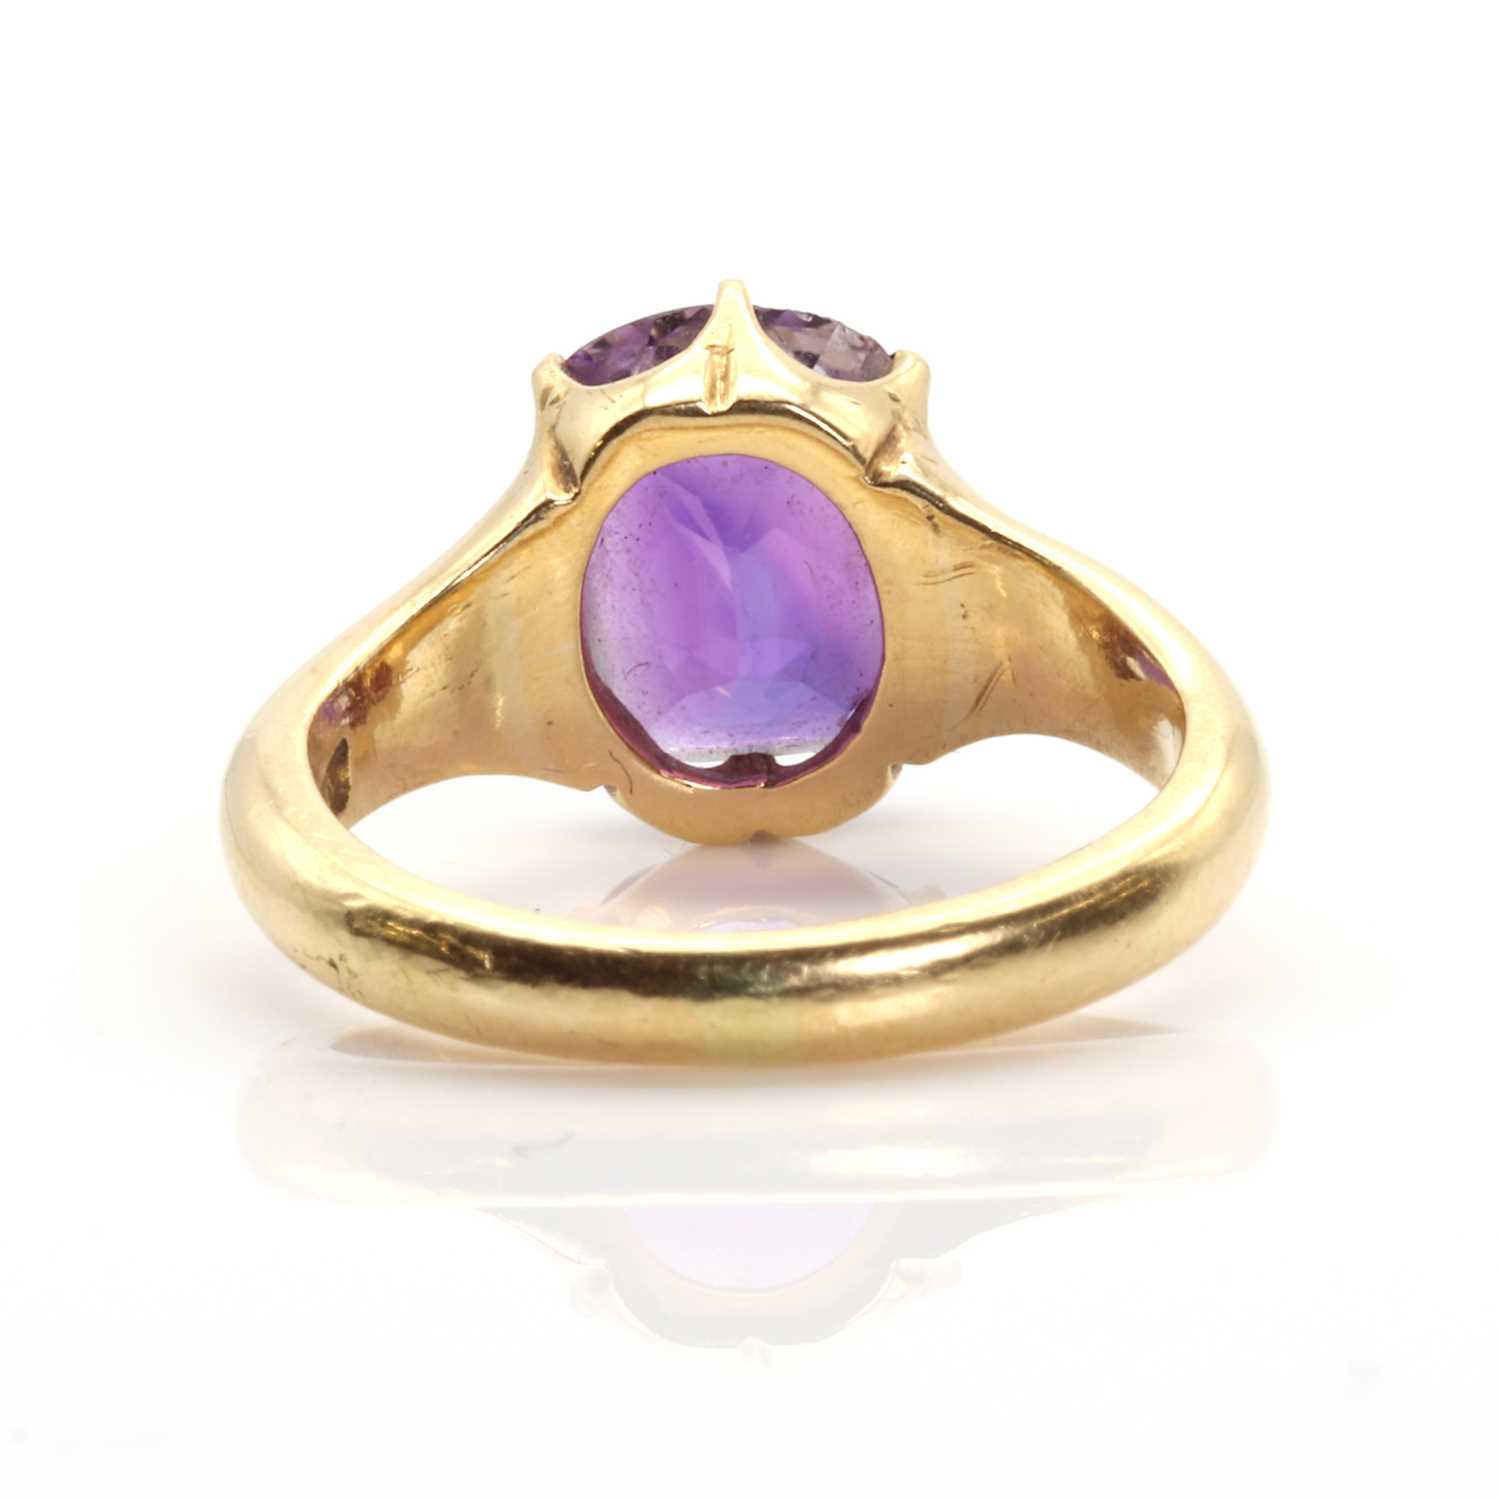 A single stone amethyst ring, by Mrs Newman, - Image 3 of 3